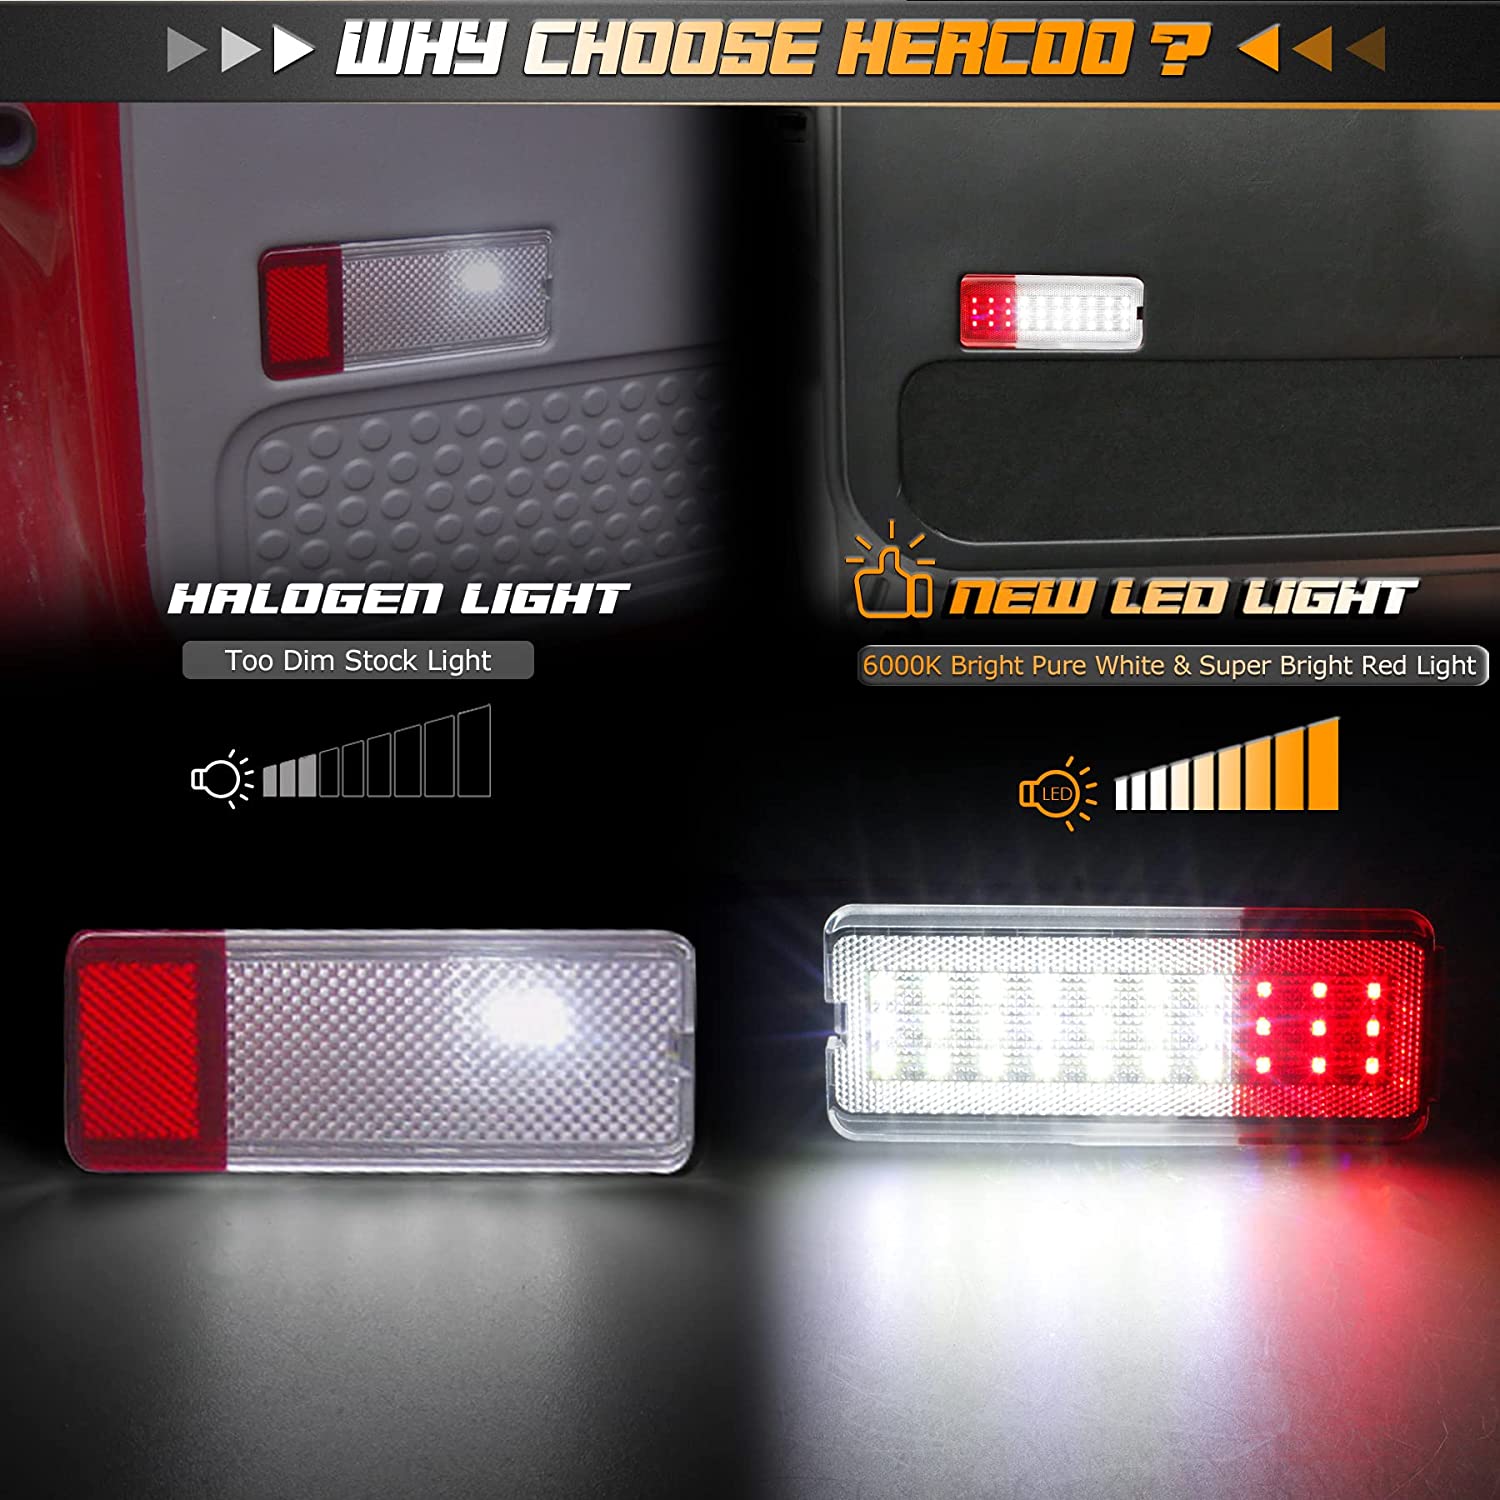 HERCOO LED Interior Door Light Premium Reflector Door Panel Courtesy Lights White & Red Lamp Compatible with Ford Excursion 2000-2005, F250 F350 F450 F550 Super Duty 1999-2007, Pack of 2